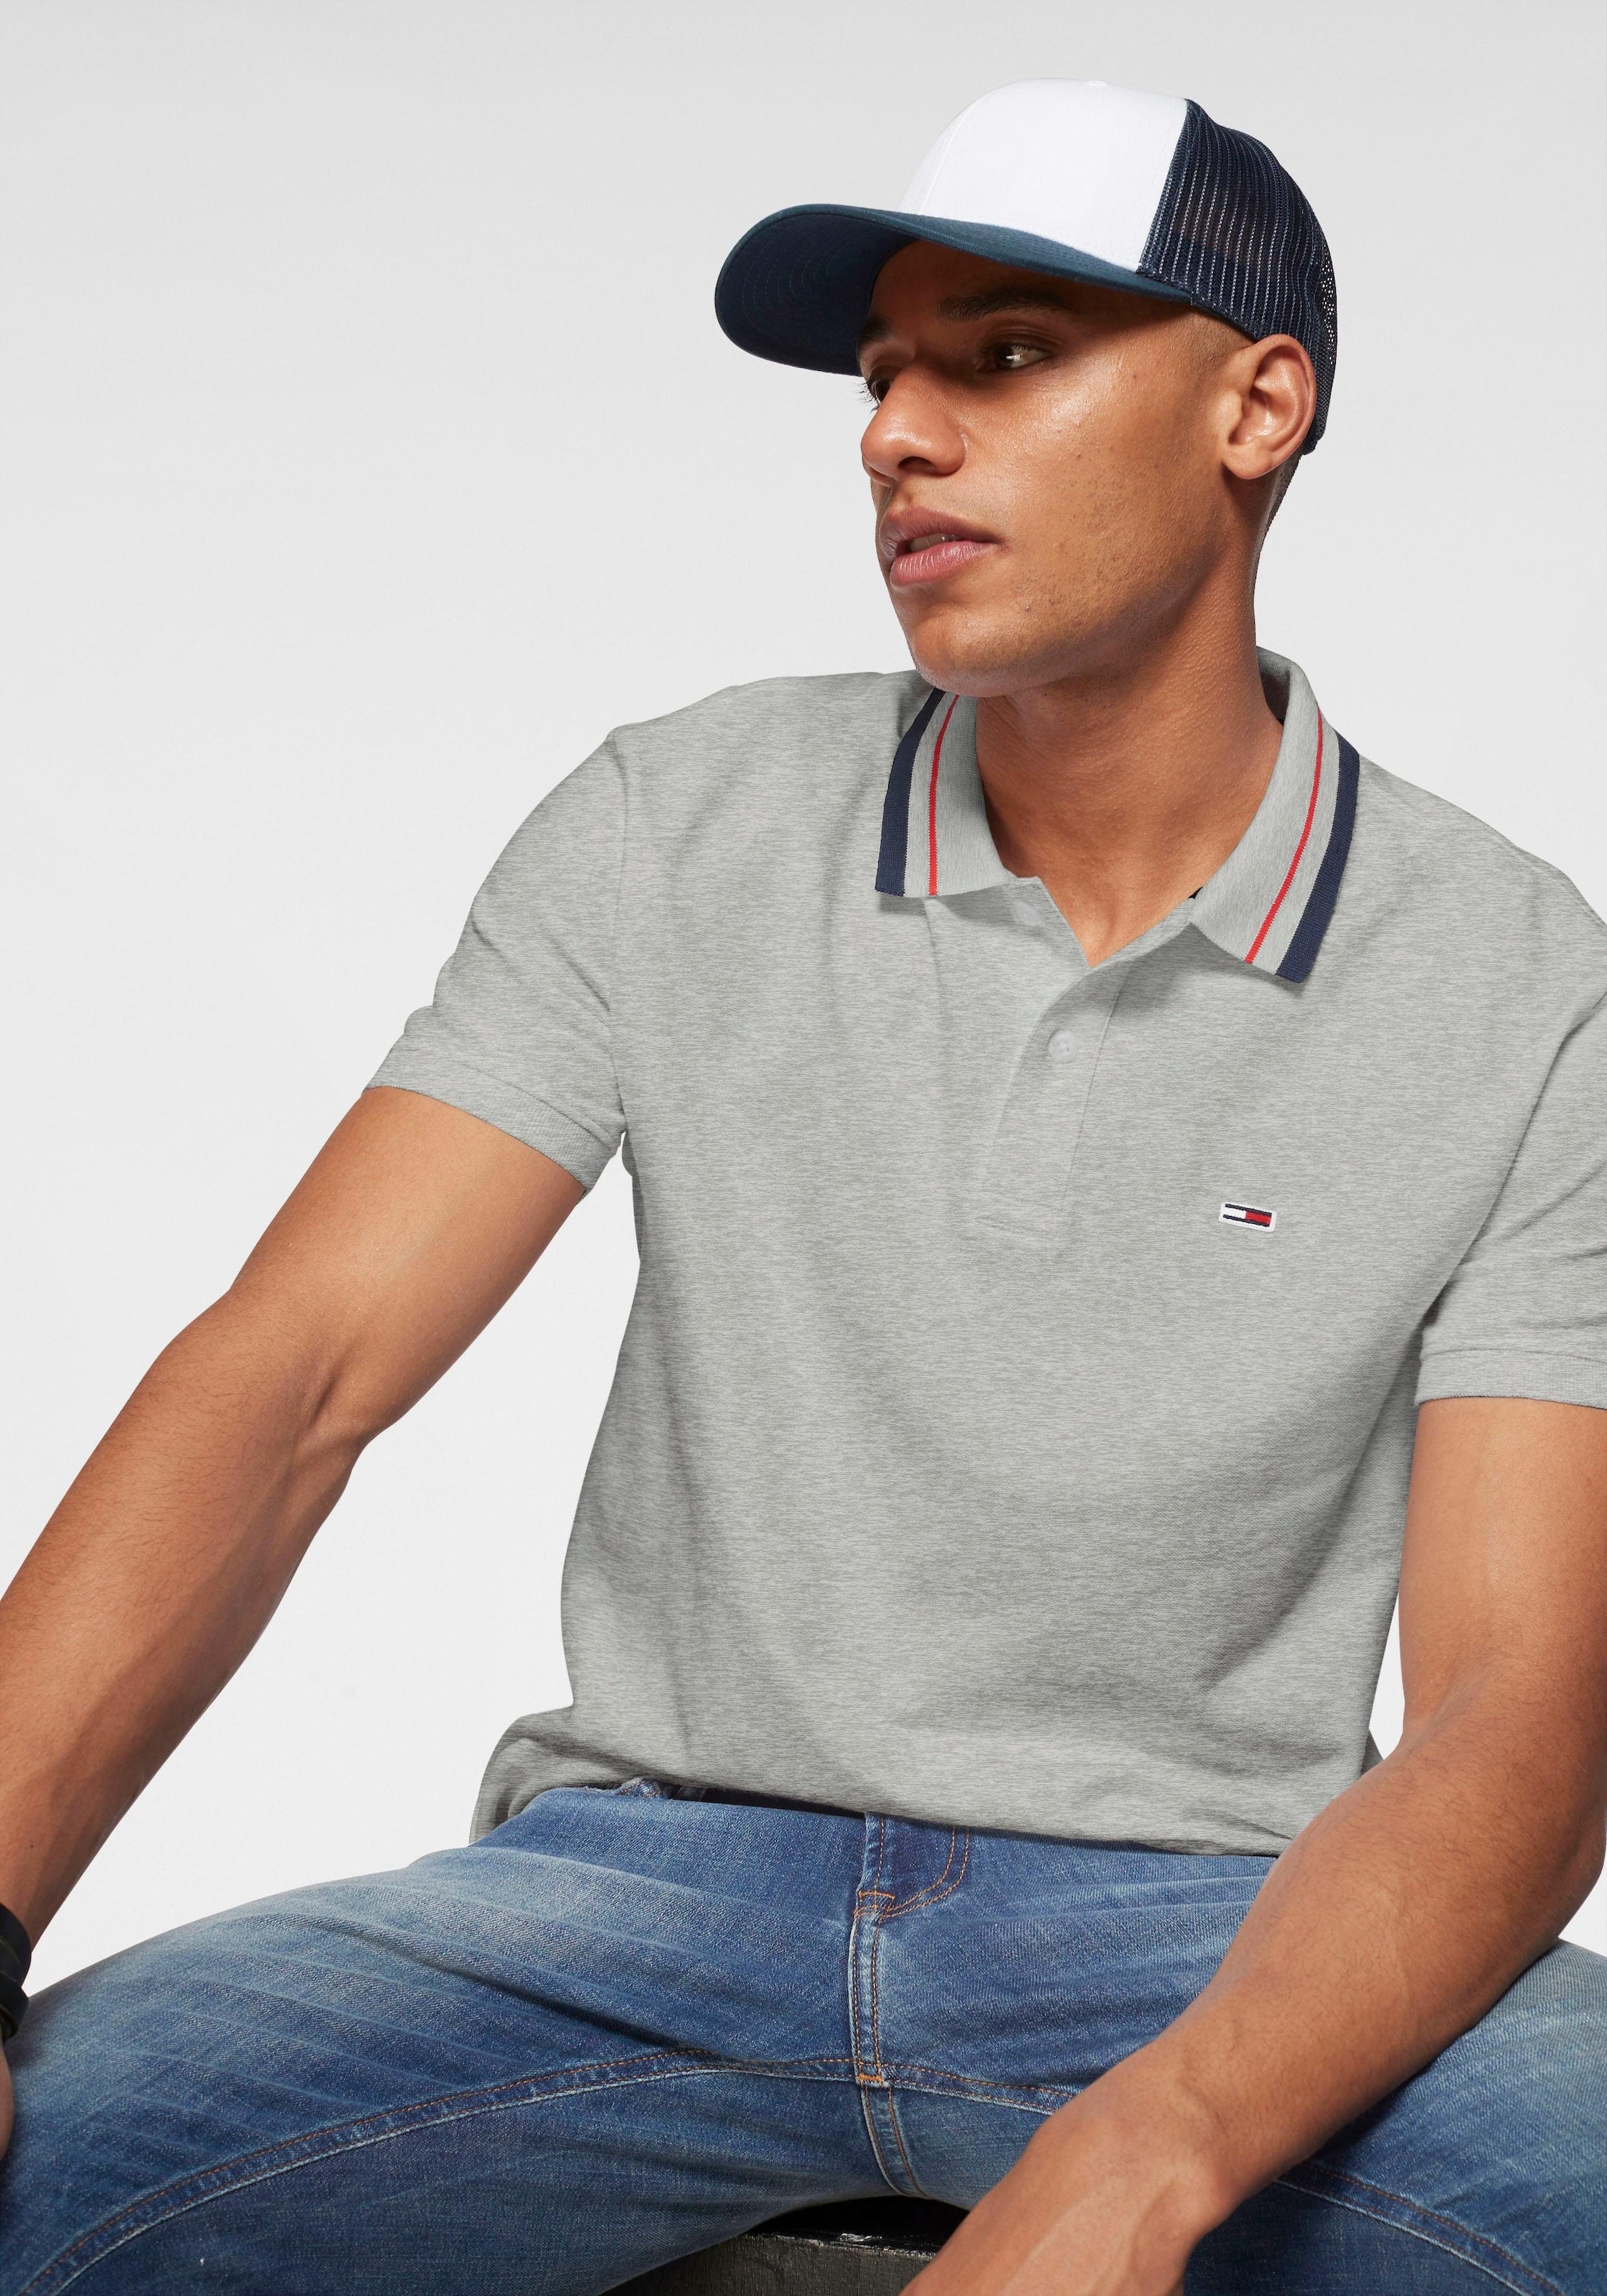 Tommy Jeans Poloshirt »TJM CLASSICS TIPPED STRETCH POLO«